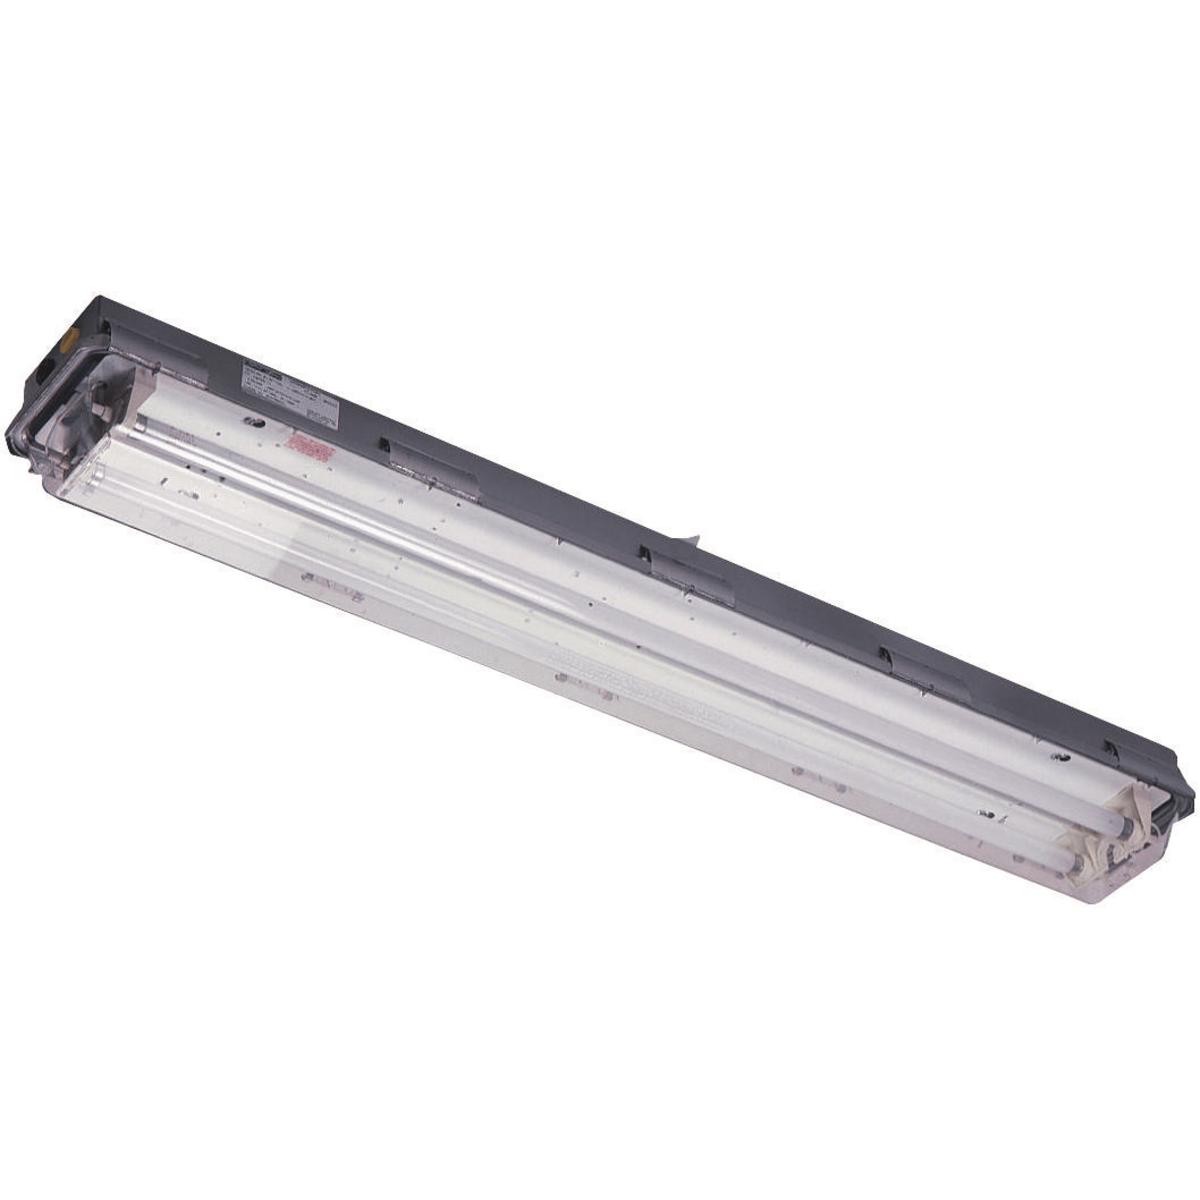 Hubbell LZ2S60230 LZ2S Series - Stainless Steel - 60W 120-277V - 4' 2-Lamp  ; NEMA 4X & IP66 rated stainless enclosure with Lexan® impact resistant polycarbonate lens. ; Two 3/4” NPT stainless hubs - one at each end (includes aluminum 3/4” close- up plug and two 3/4” x 1/2